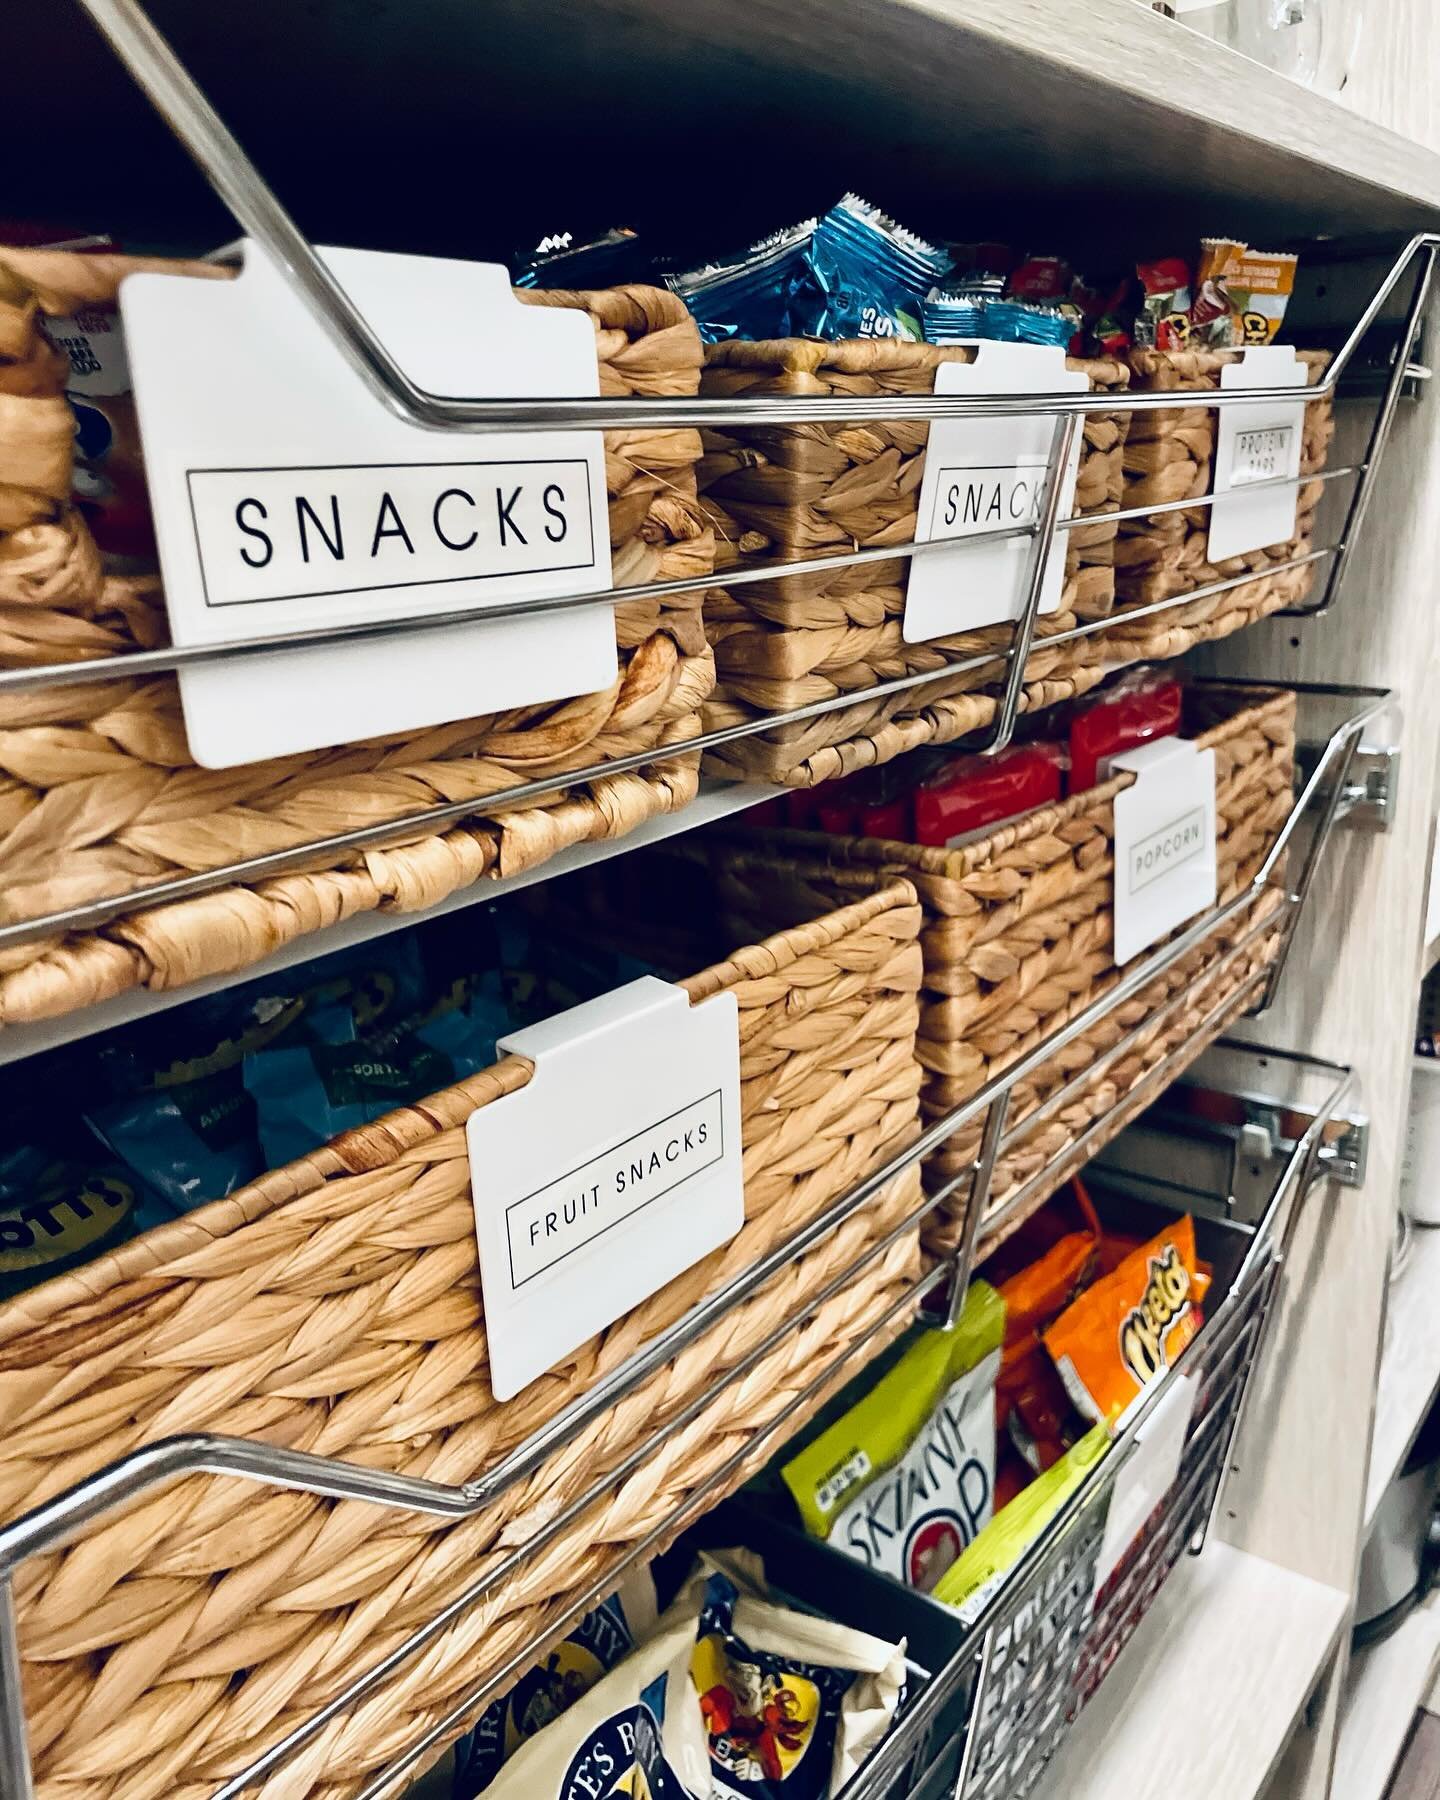 Just a friendly reminder that summer break will be here before you know it! 🤪 And that means: prepare the SNACK drawers and bins! 💃🏻✔️

While life may be a bit more chaotic with the kiddos at home for the summer, your kitchen and pantry may need a